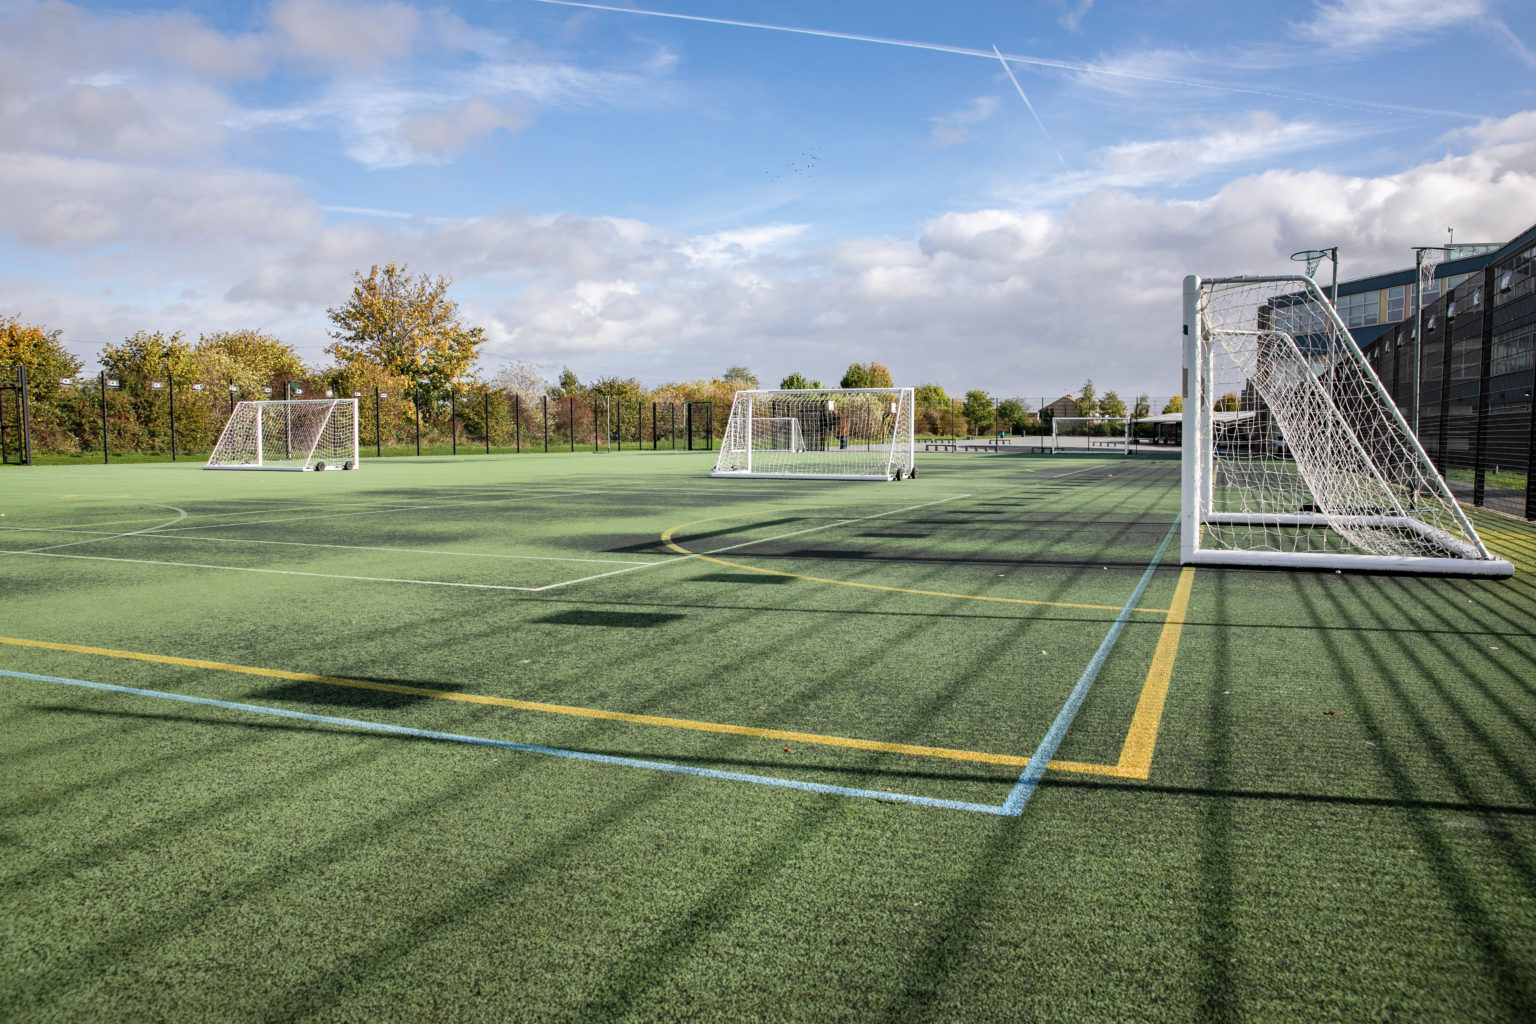 Football pitch at Crayford academy - part of Haberdashers' Academies Trust South